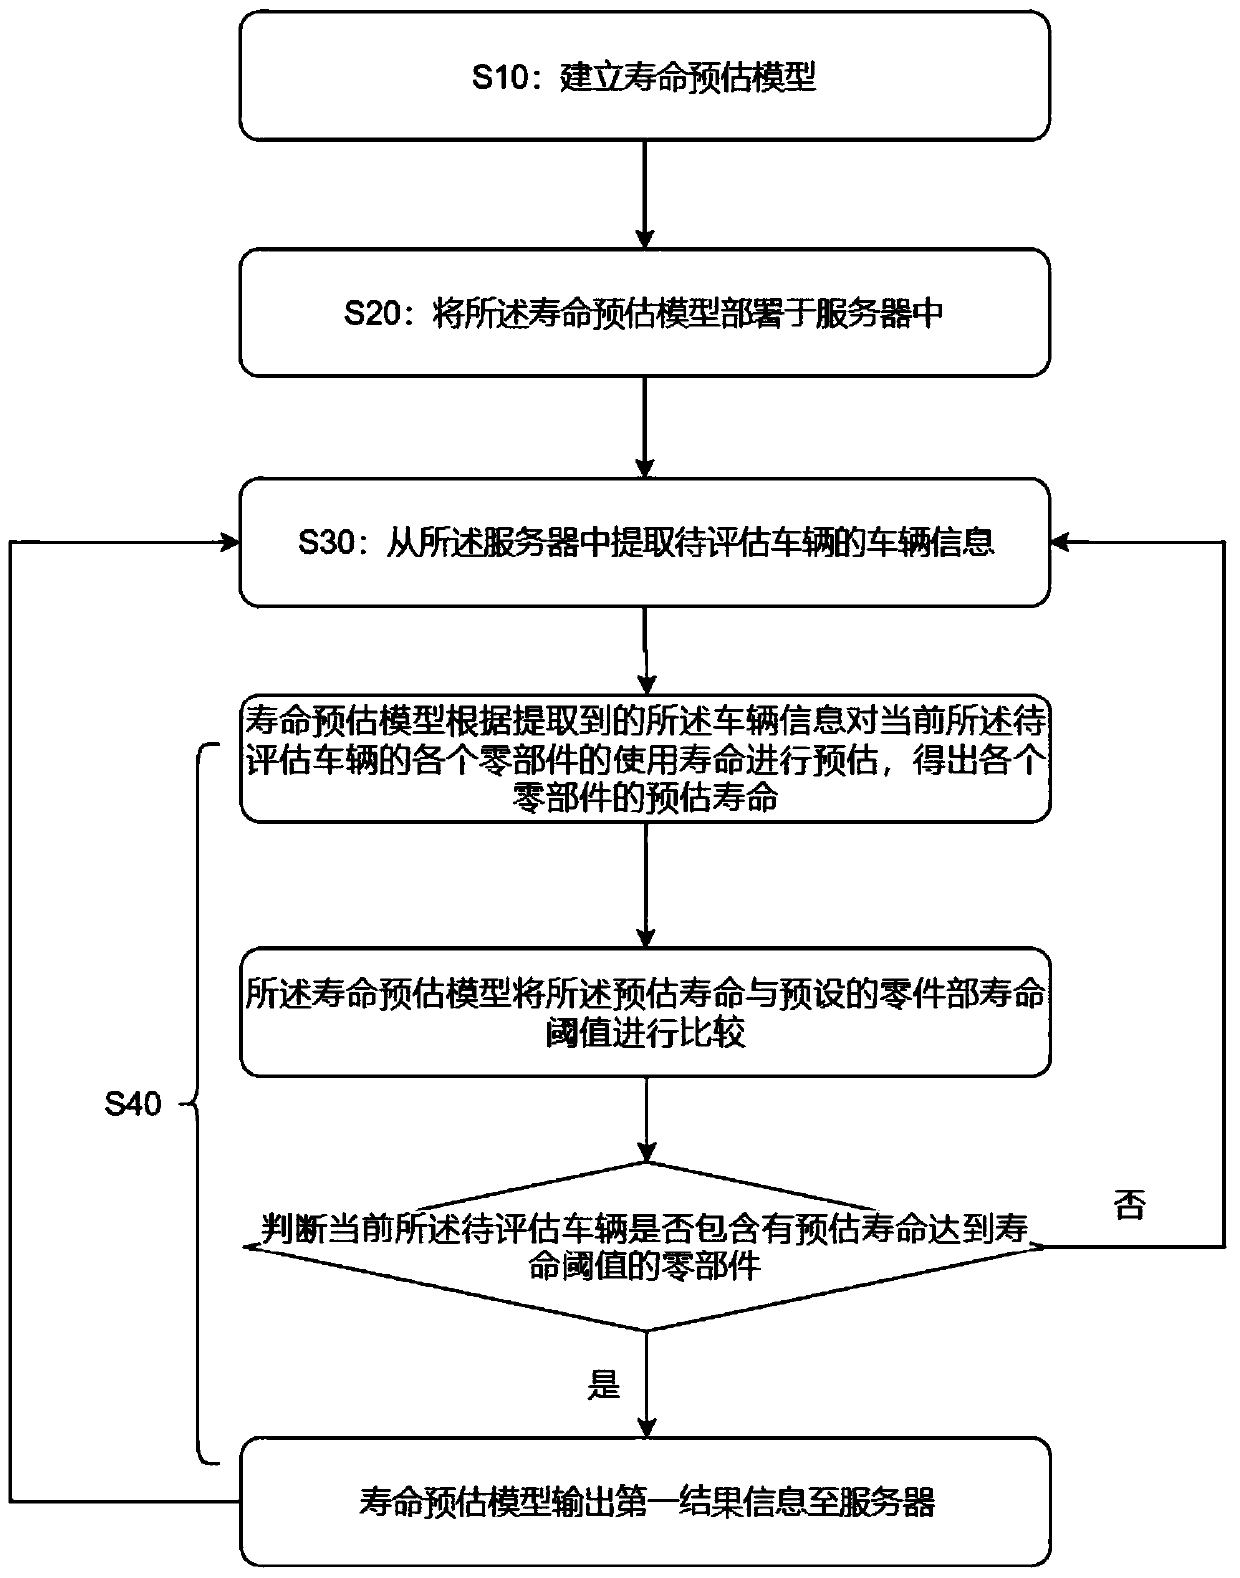 Vehicle part service life prediction method and system based on user fault reporting data